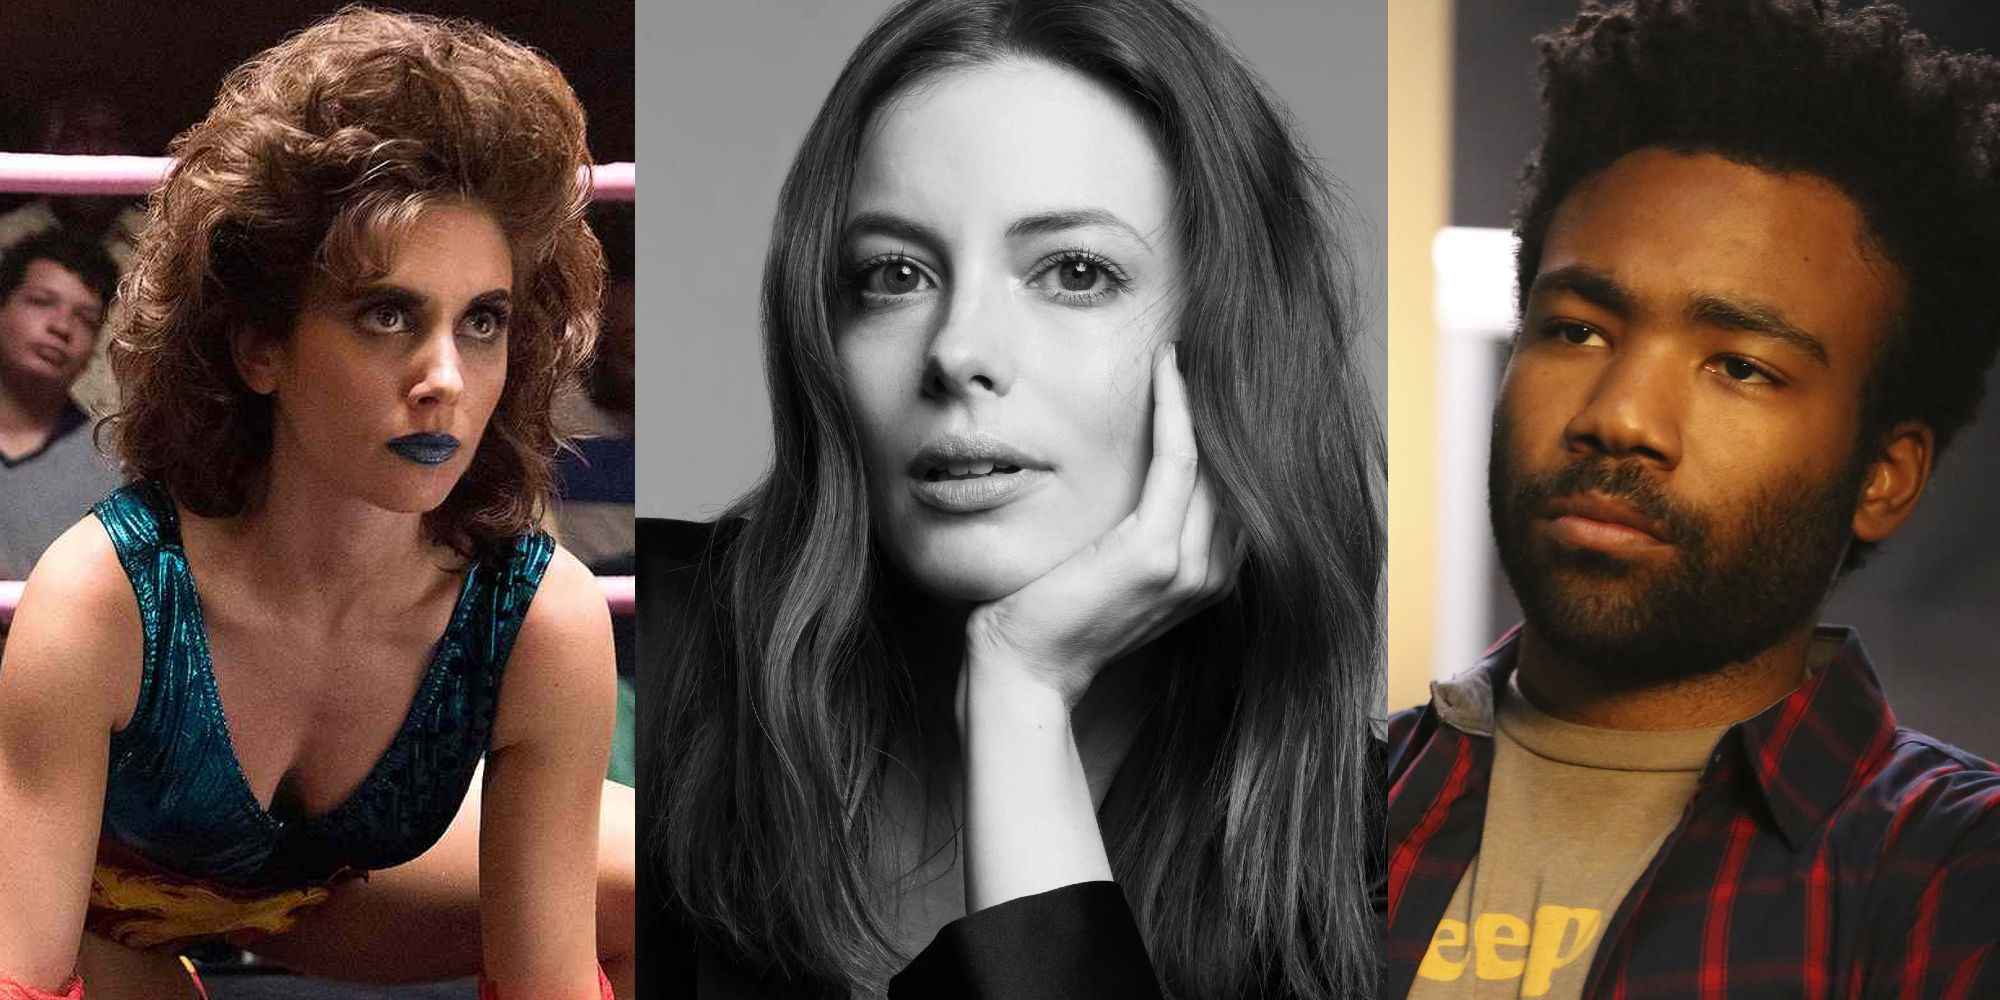 Alison Brie in GLOW; Gillian Jacobs in a photoshoot; Donald Glover in Atlanta